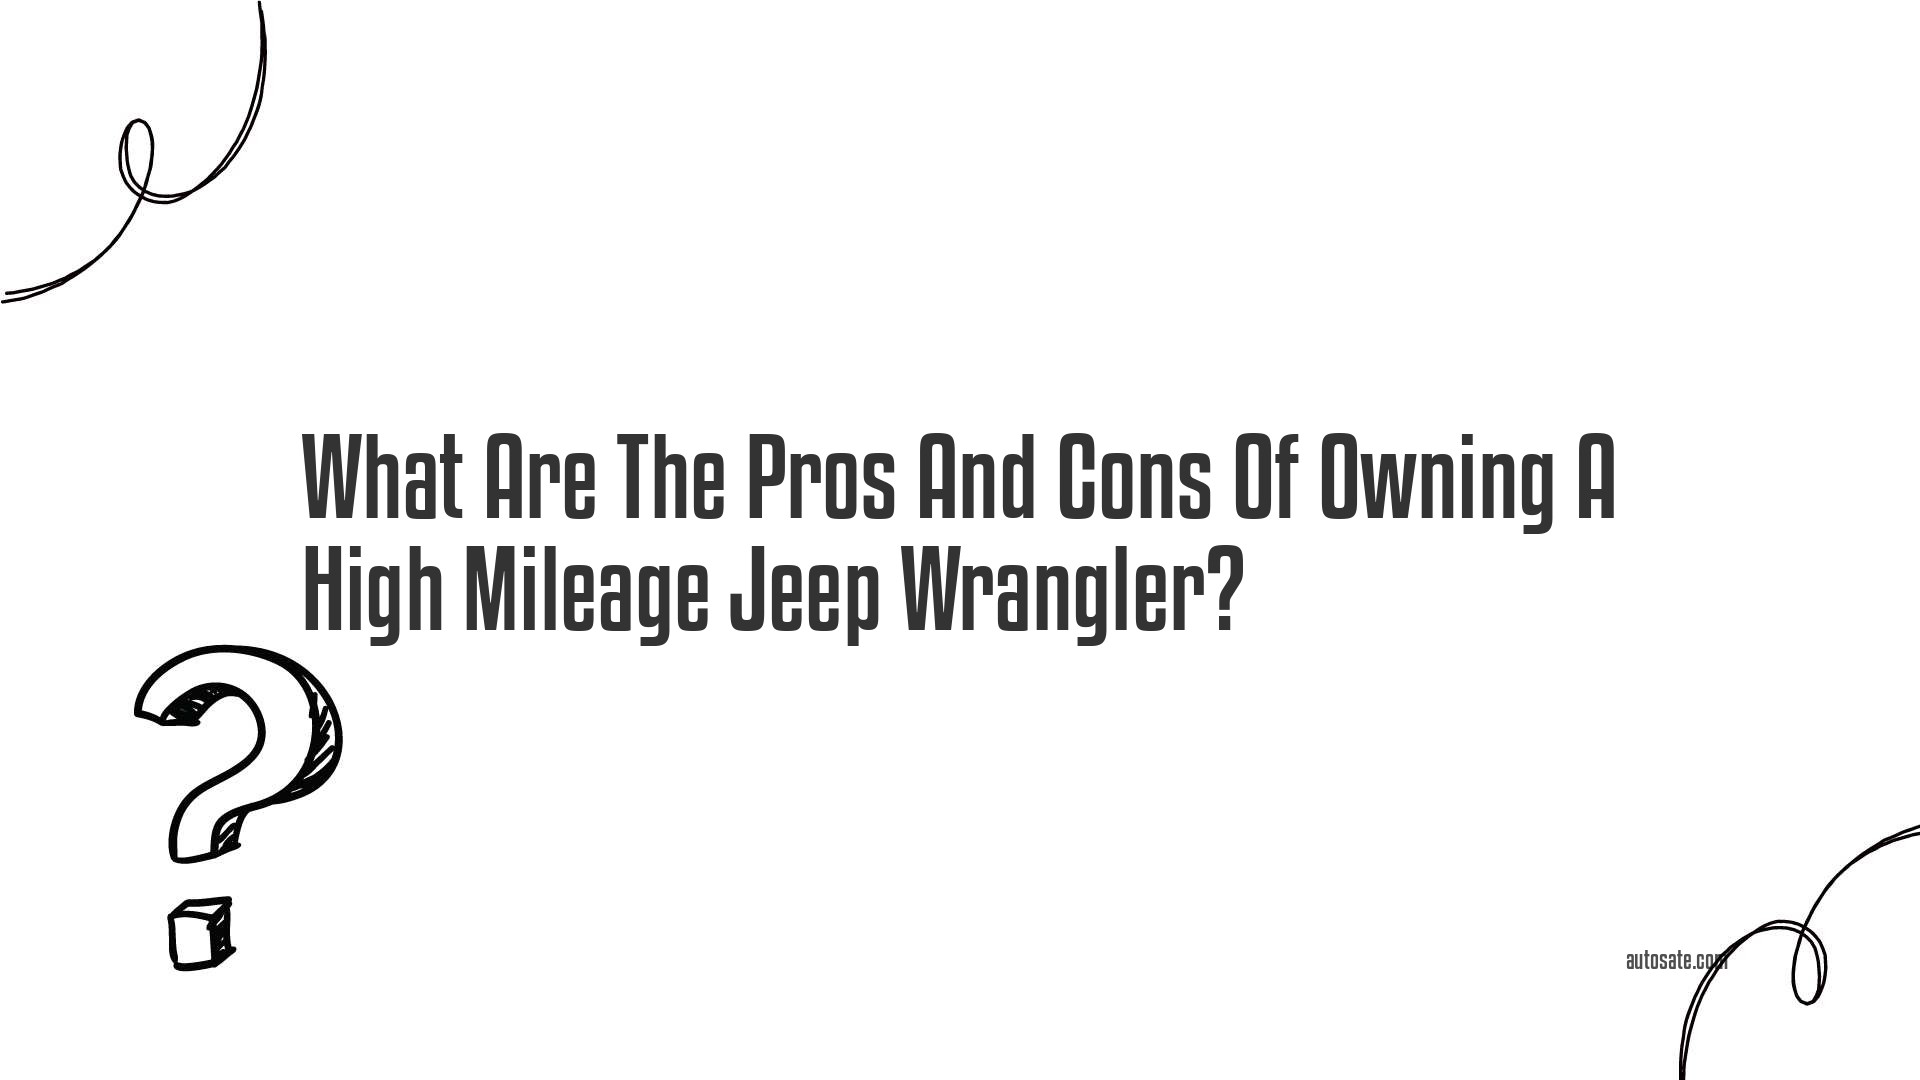 What Are The Pros And Cons Of Owning A High Mileage Jeep Wrangler?